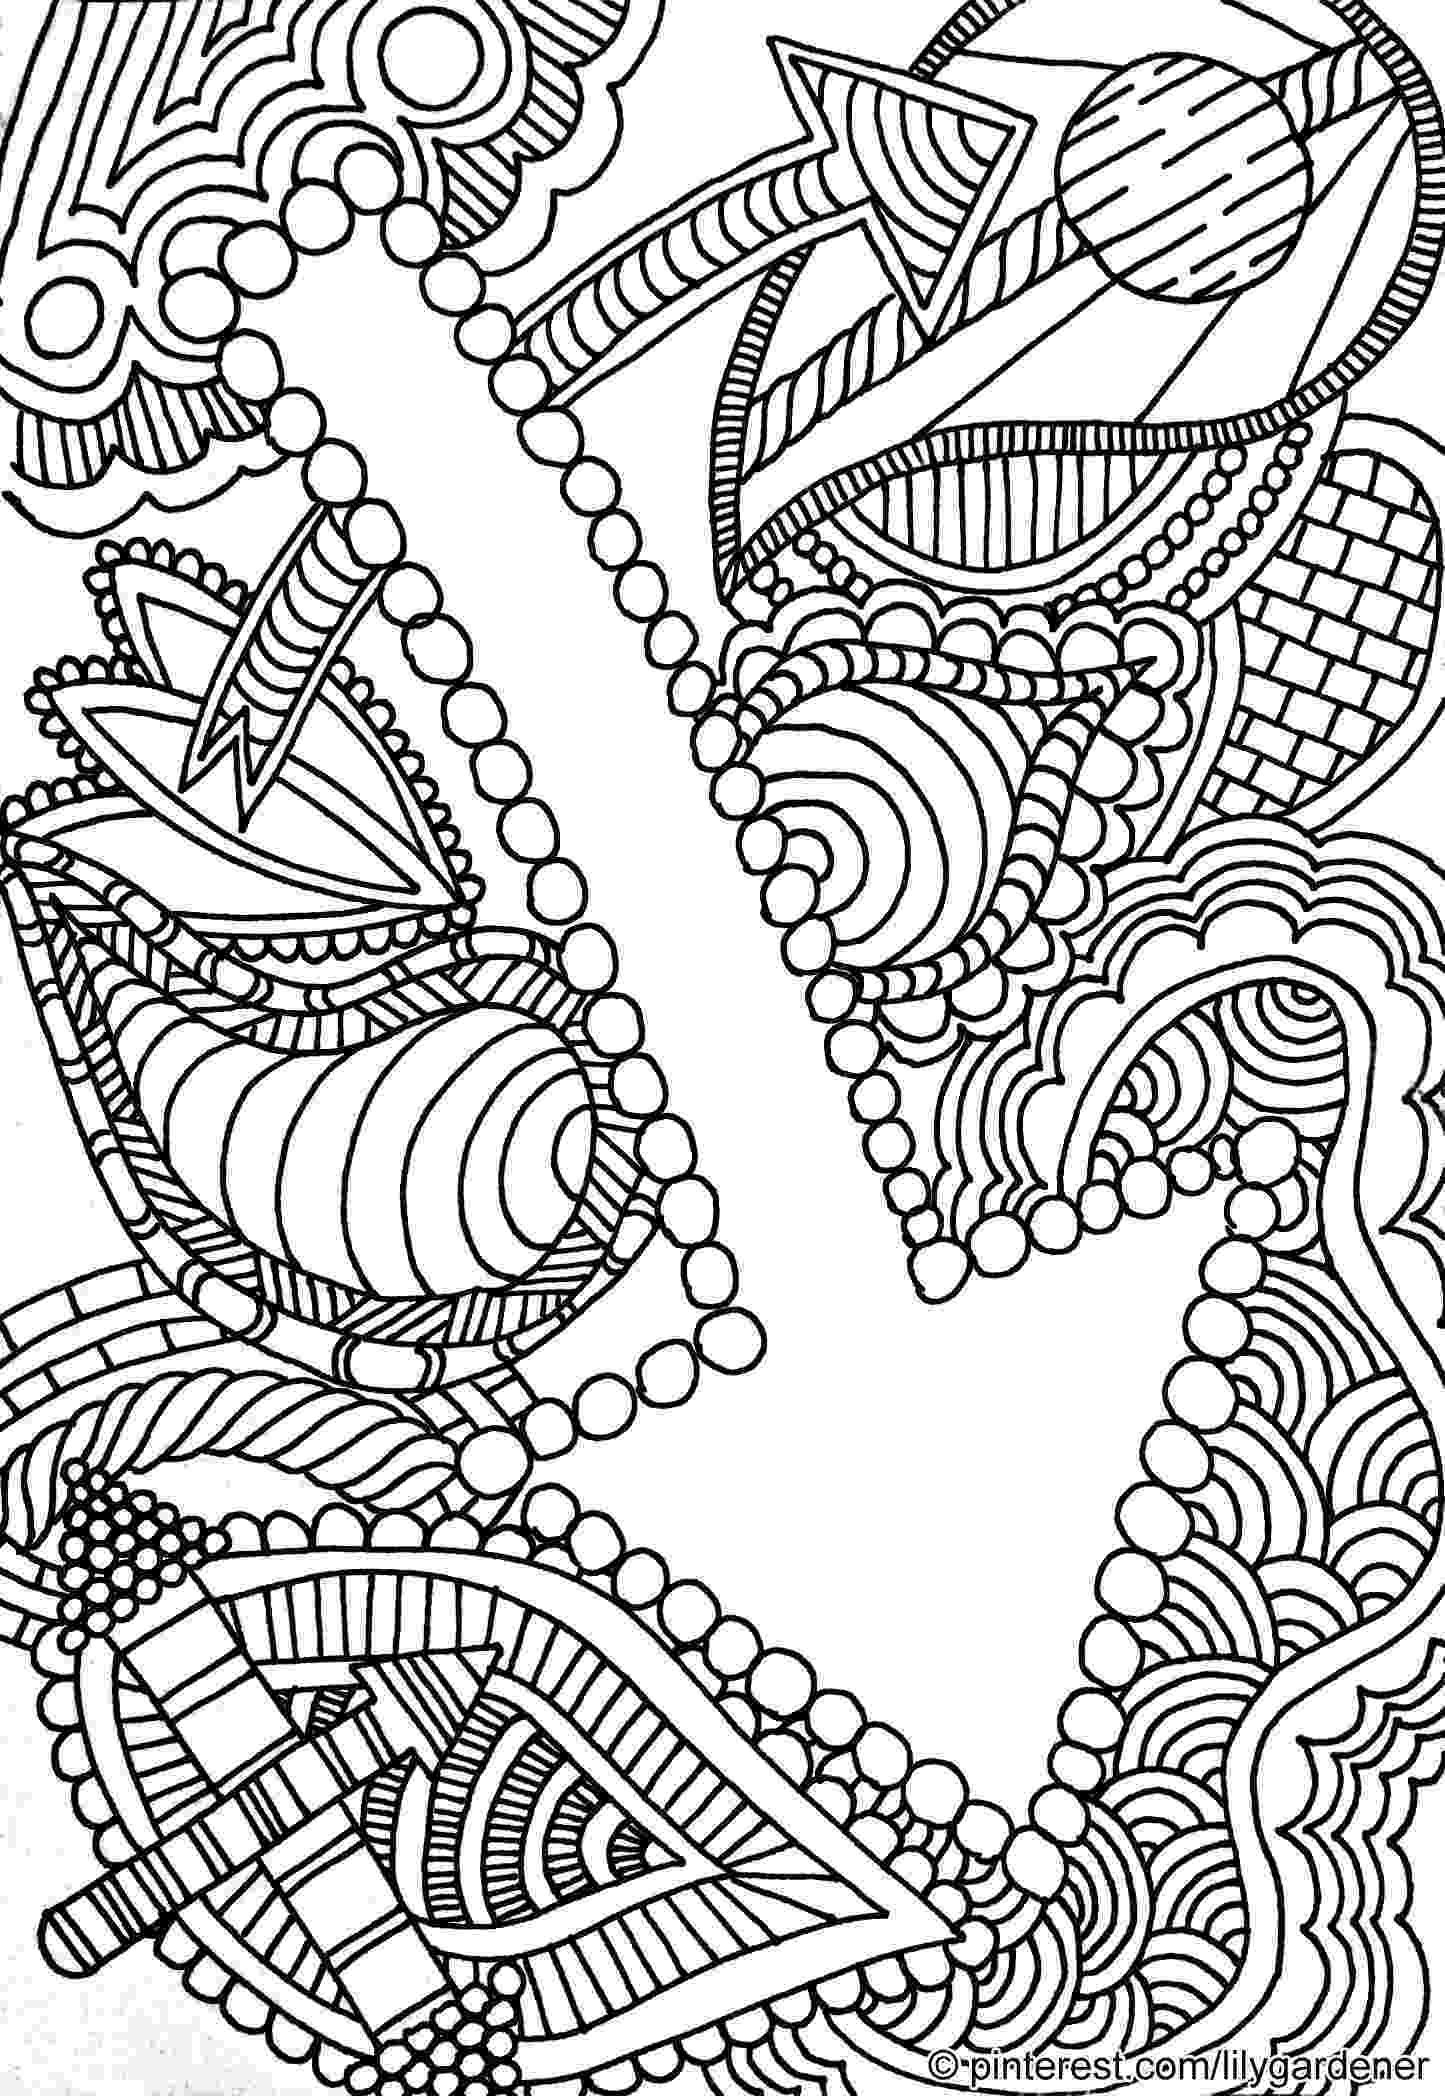 colouring pages adults online free pin by denise bynes on coloring sheets adult coloring adults colouring free pages online 